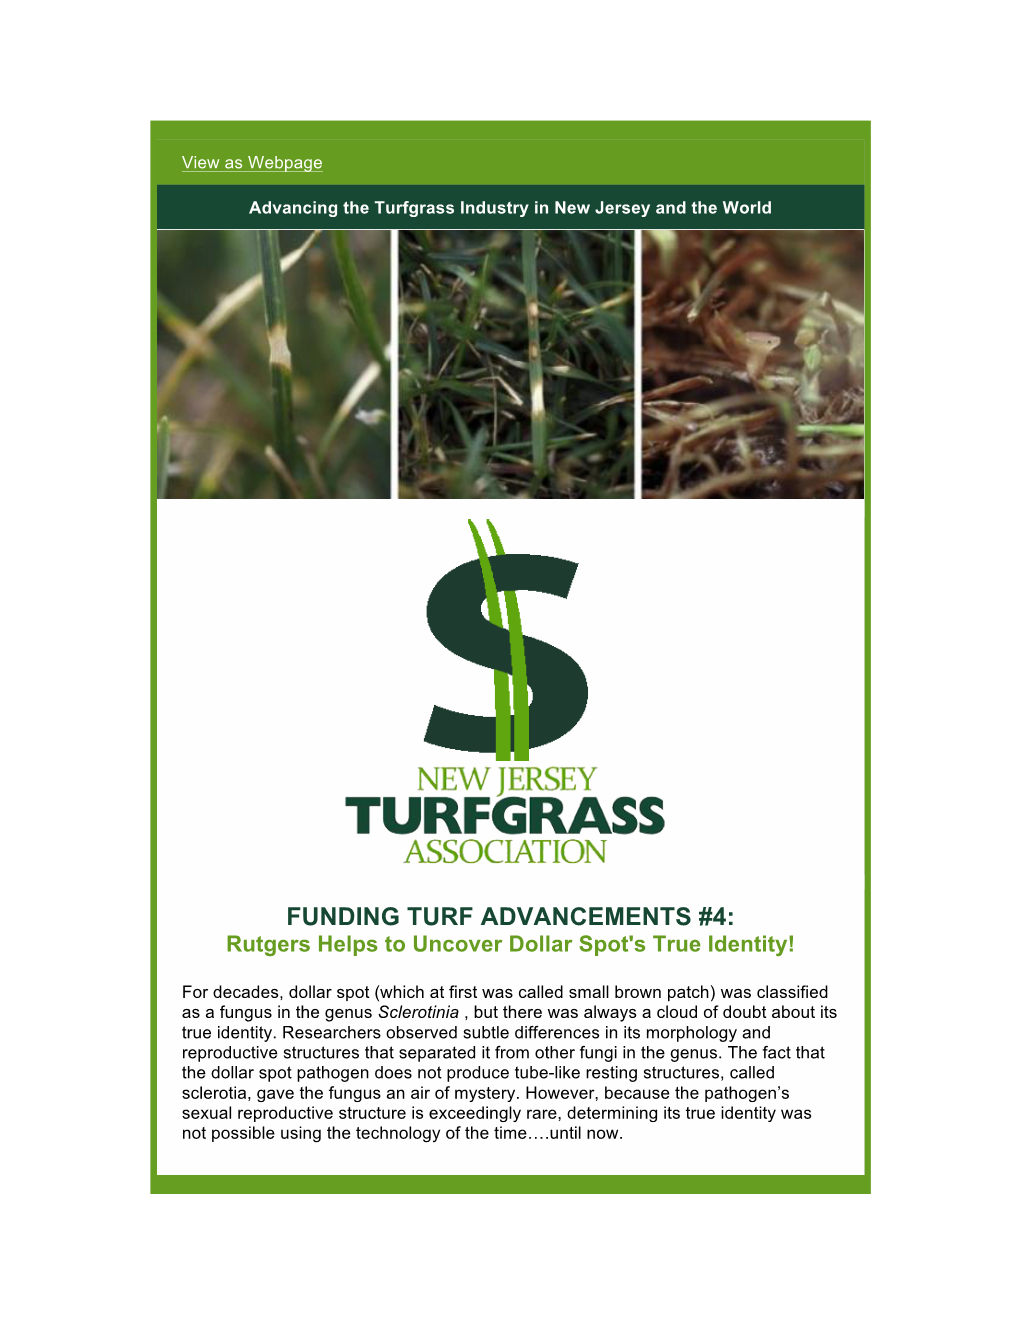 Rutgers Helps Uncover Dollar Spot's True Identity!